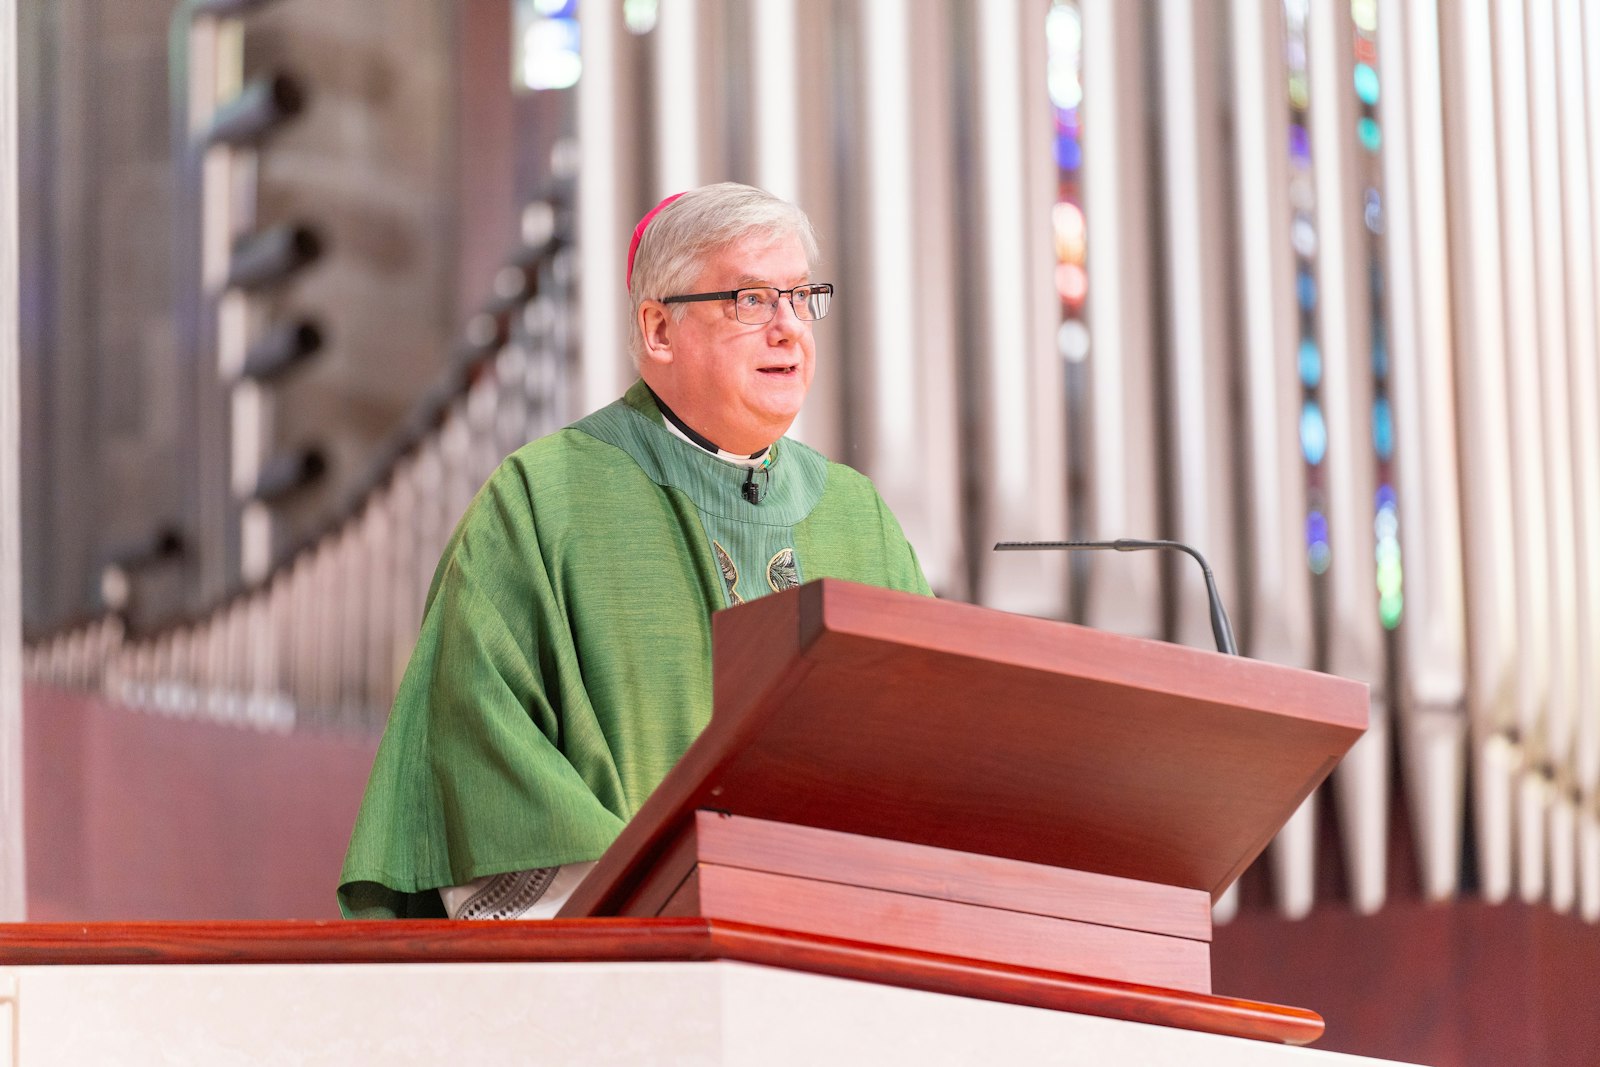 Auxiliary Bishop Gerard W. Battersby delivers the homily Jan. 15 during the annual Mass for Justice and Peace at the Cathedral of the Most Blessed Sacrament.